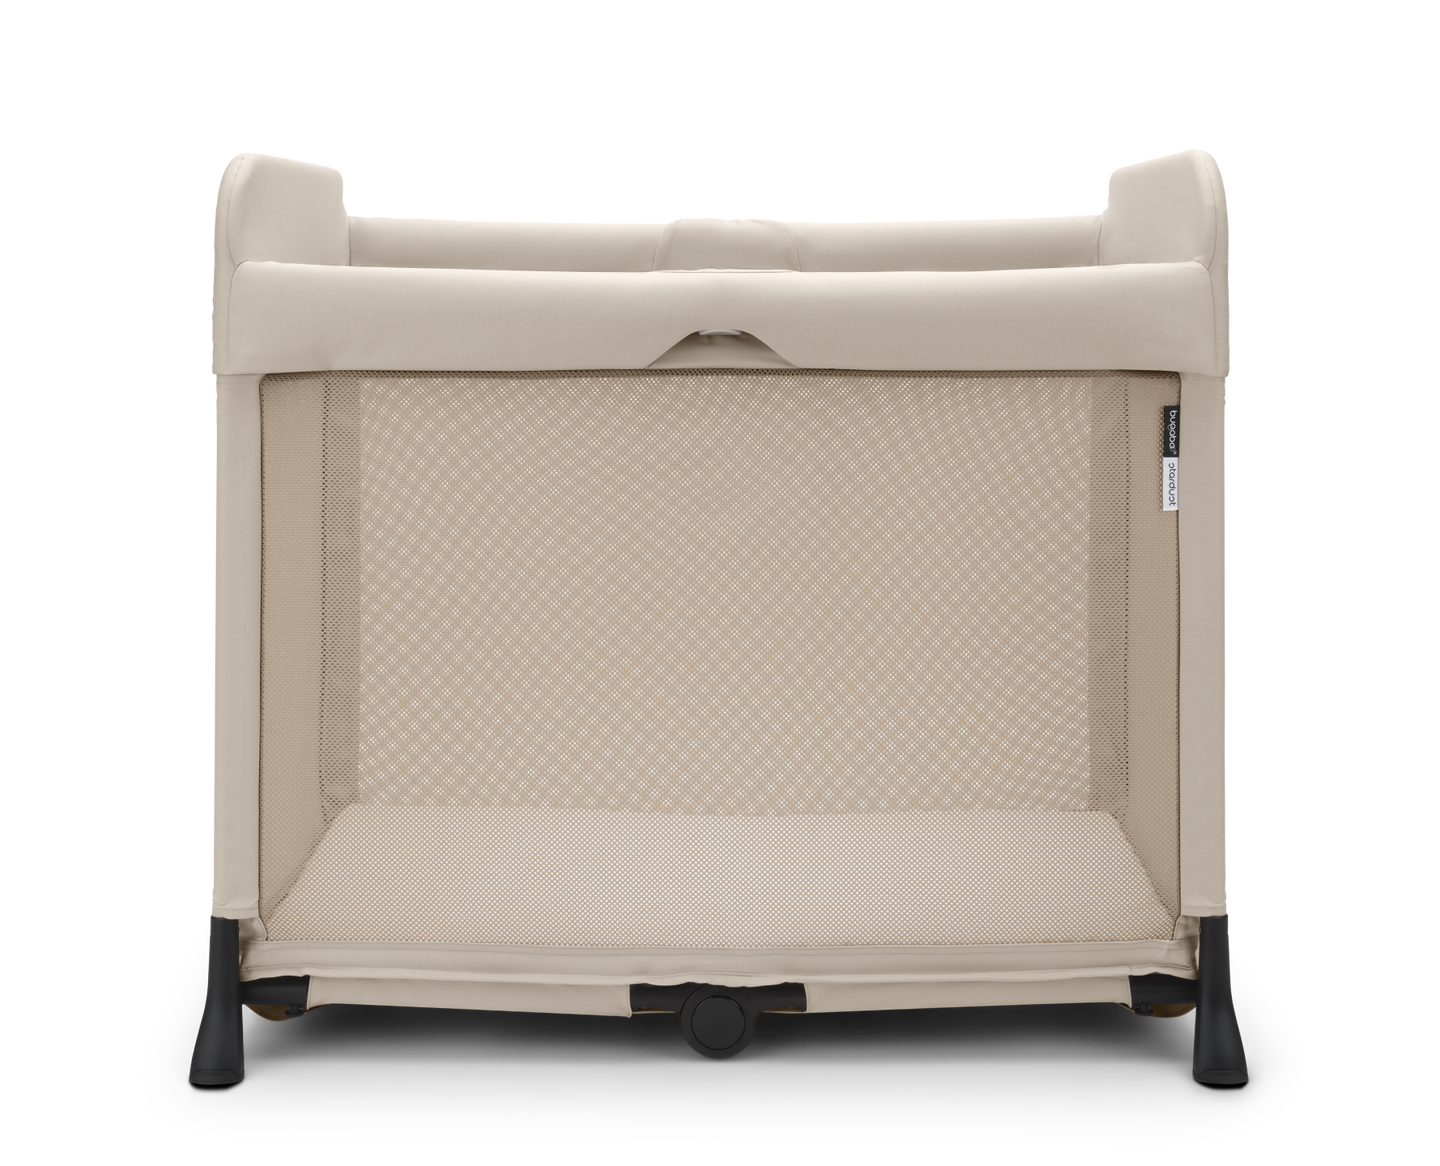 The Bugaboo Stardust play yard in Desert Taupe.